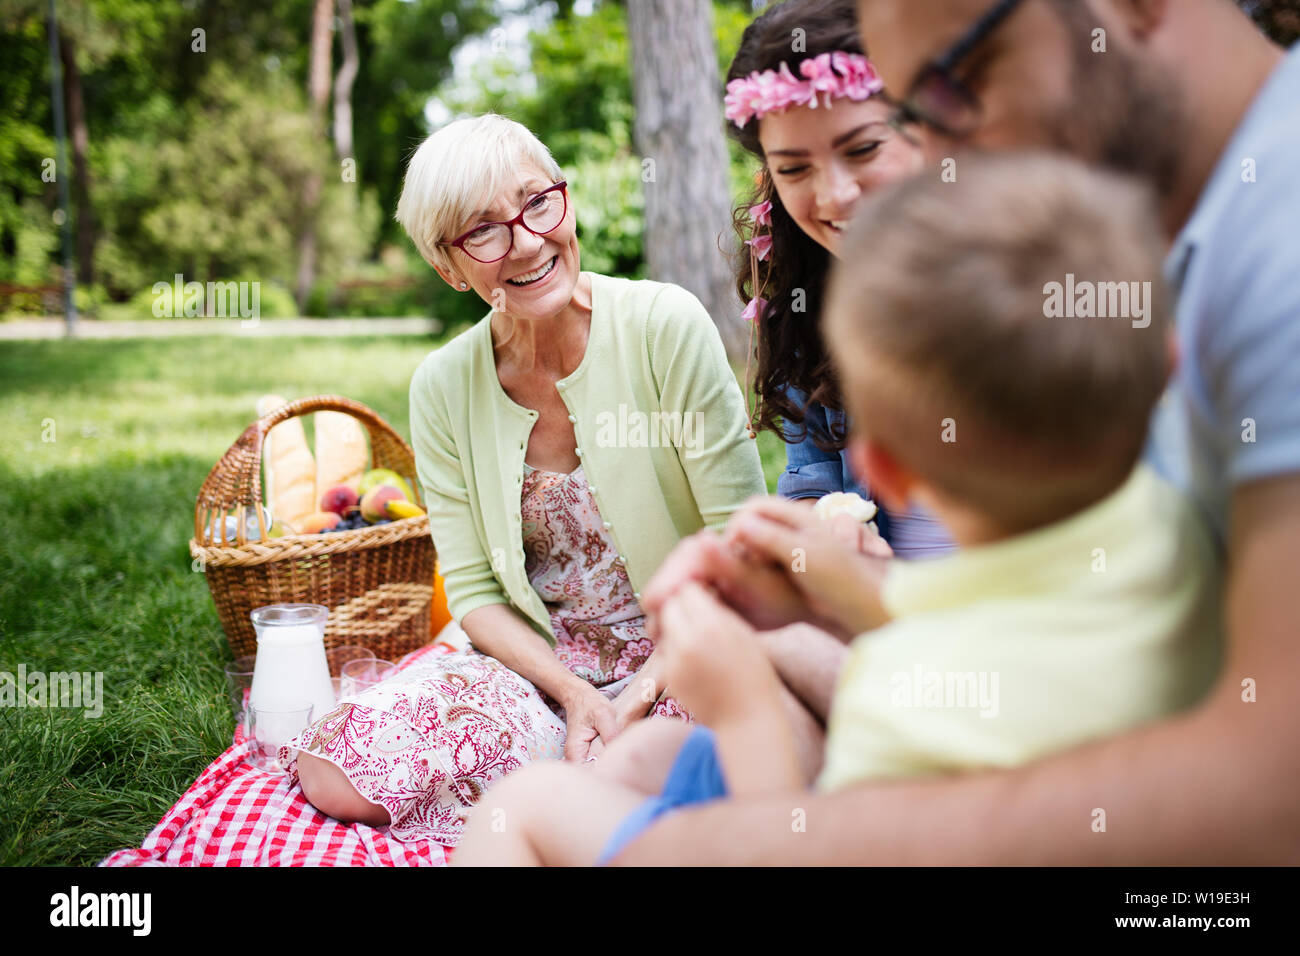 Happy young family playing on the grass in the park and enjoying picnic Stock Photo